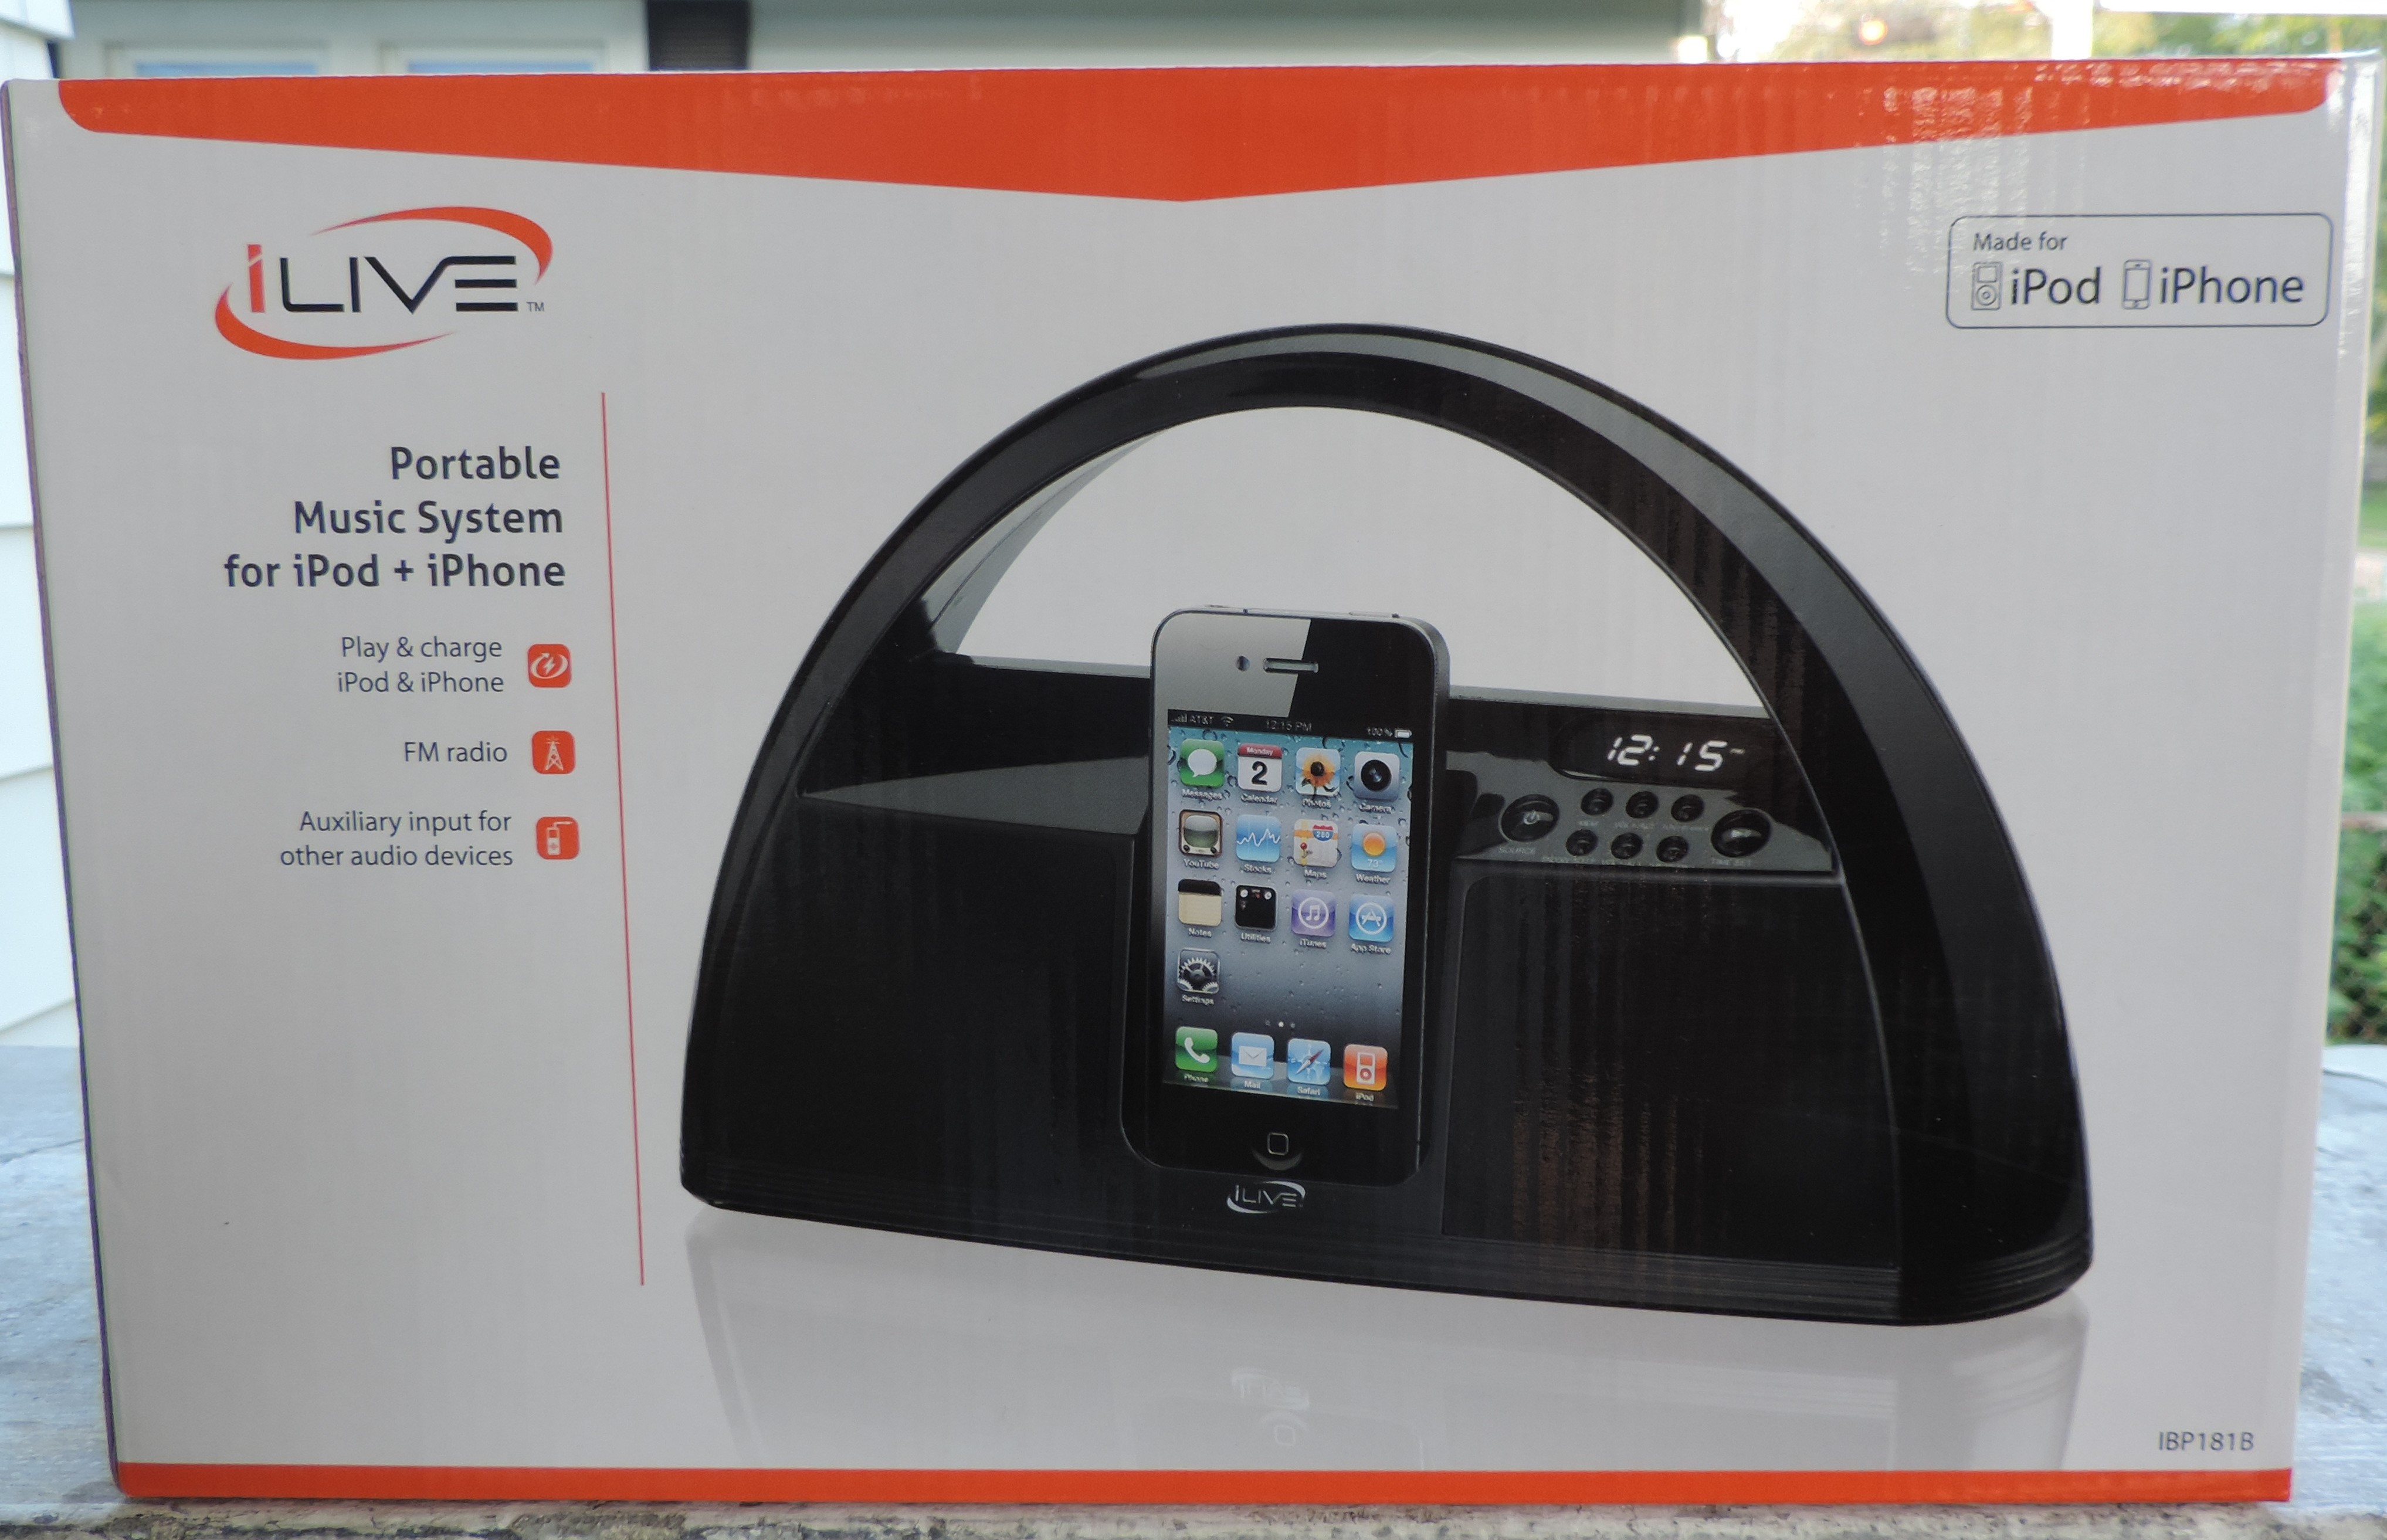 iLive Portable Music System for iPod + iPhone